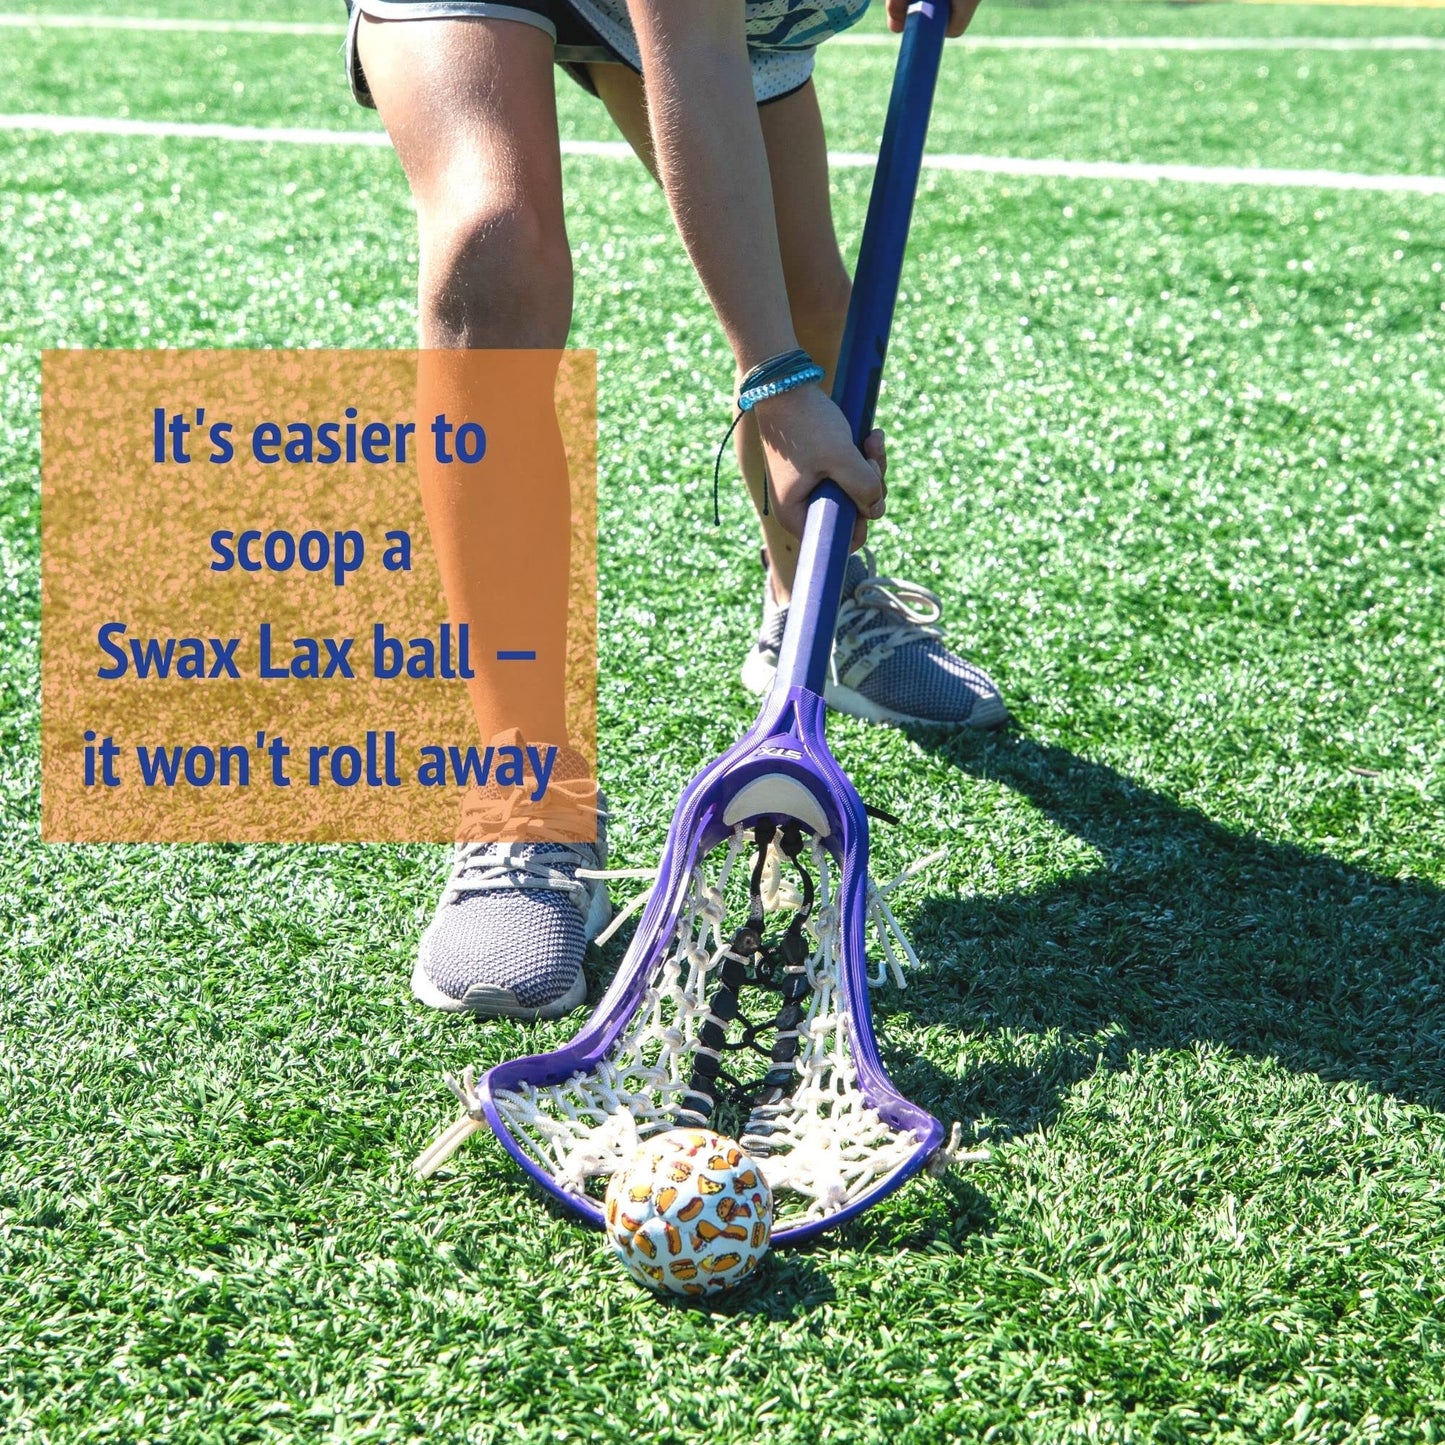 SWAX LAX Lacrosse Training Ball - Indoor Outdoor Practice Less Bounce & Rebounds